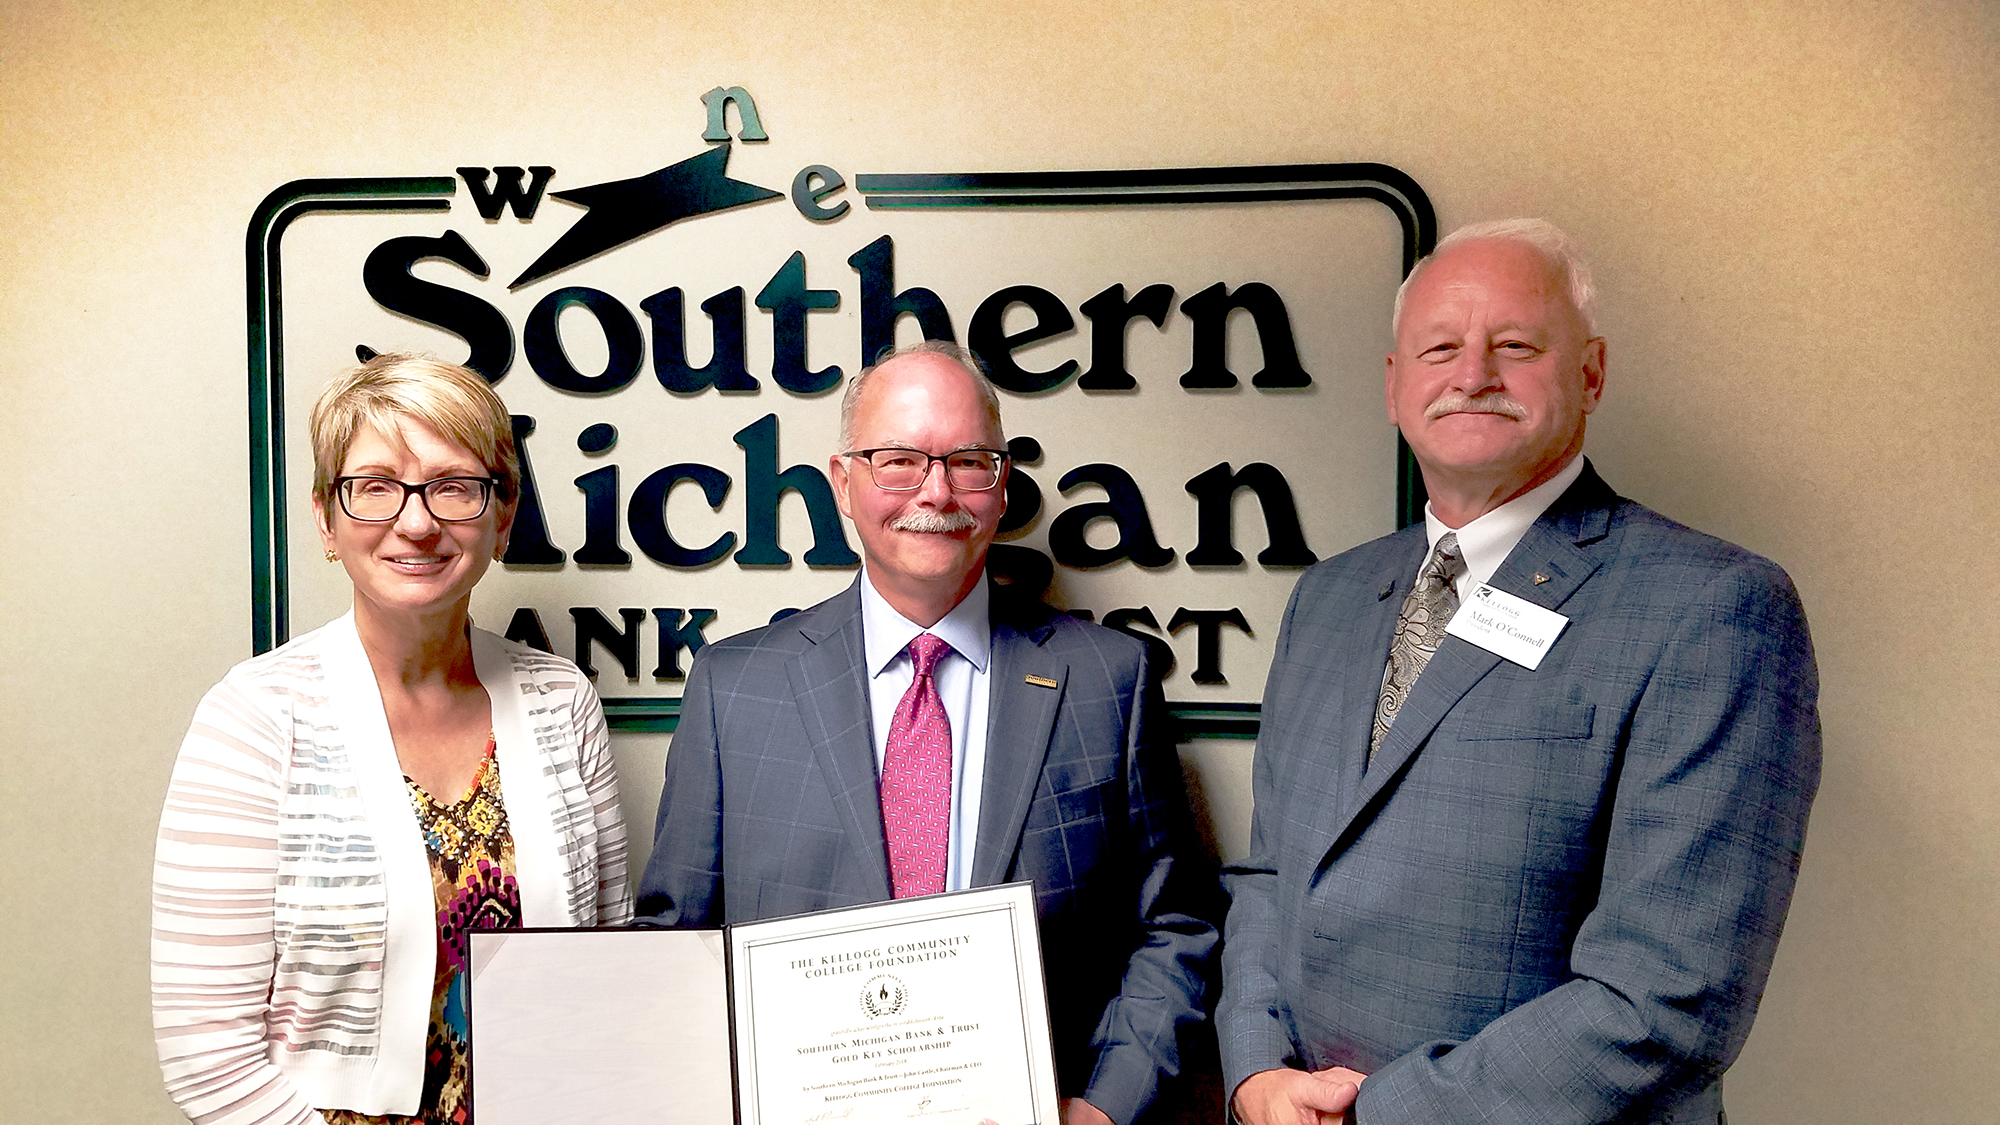 Pictured, left to right, are KCC Foundation Executive Director Teresa Durham, Southern Michigan Bank & Trust Chairman and CEO John Castle and KCC President Mark O'Connell.